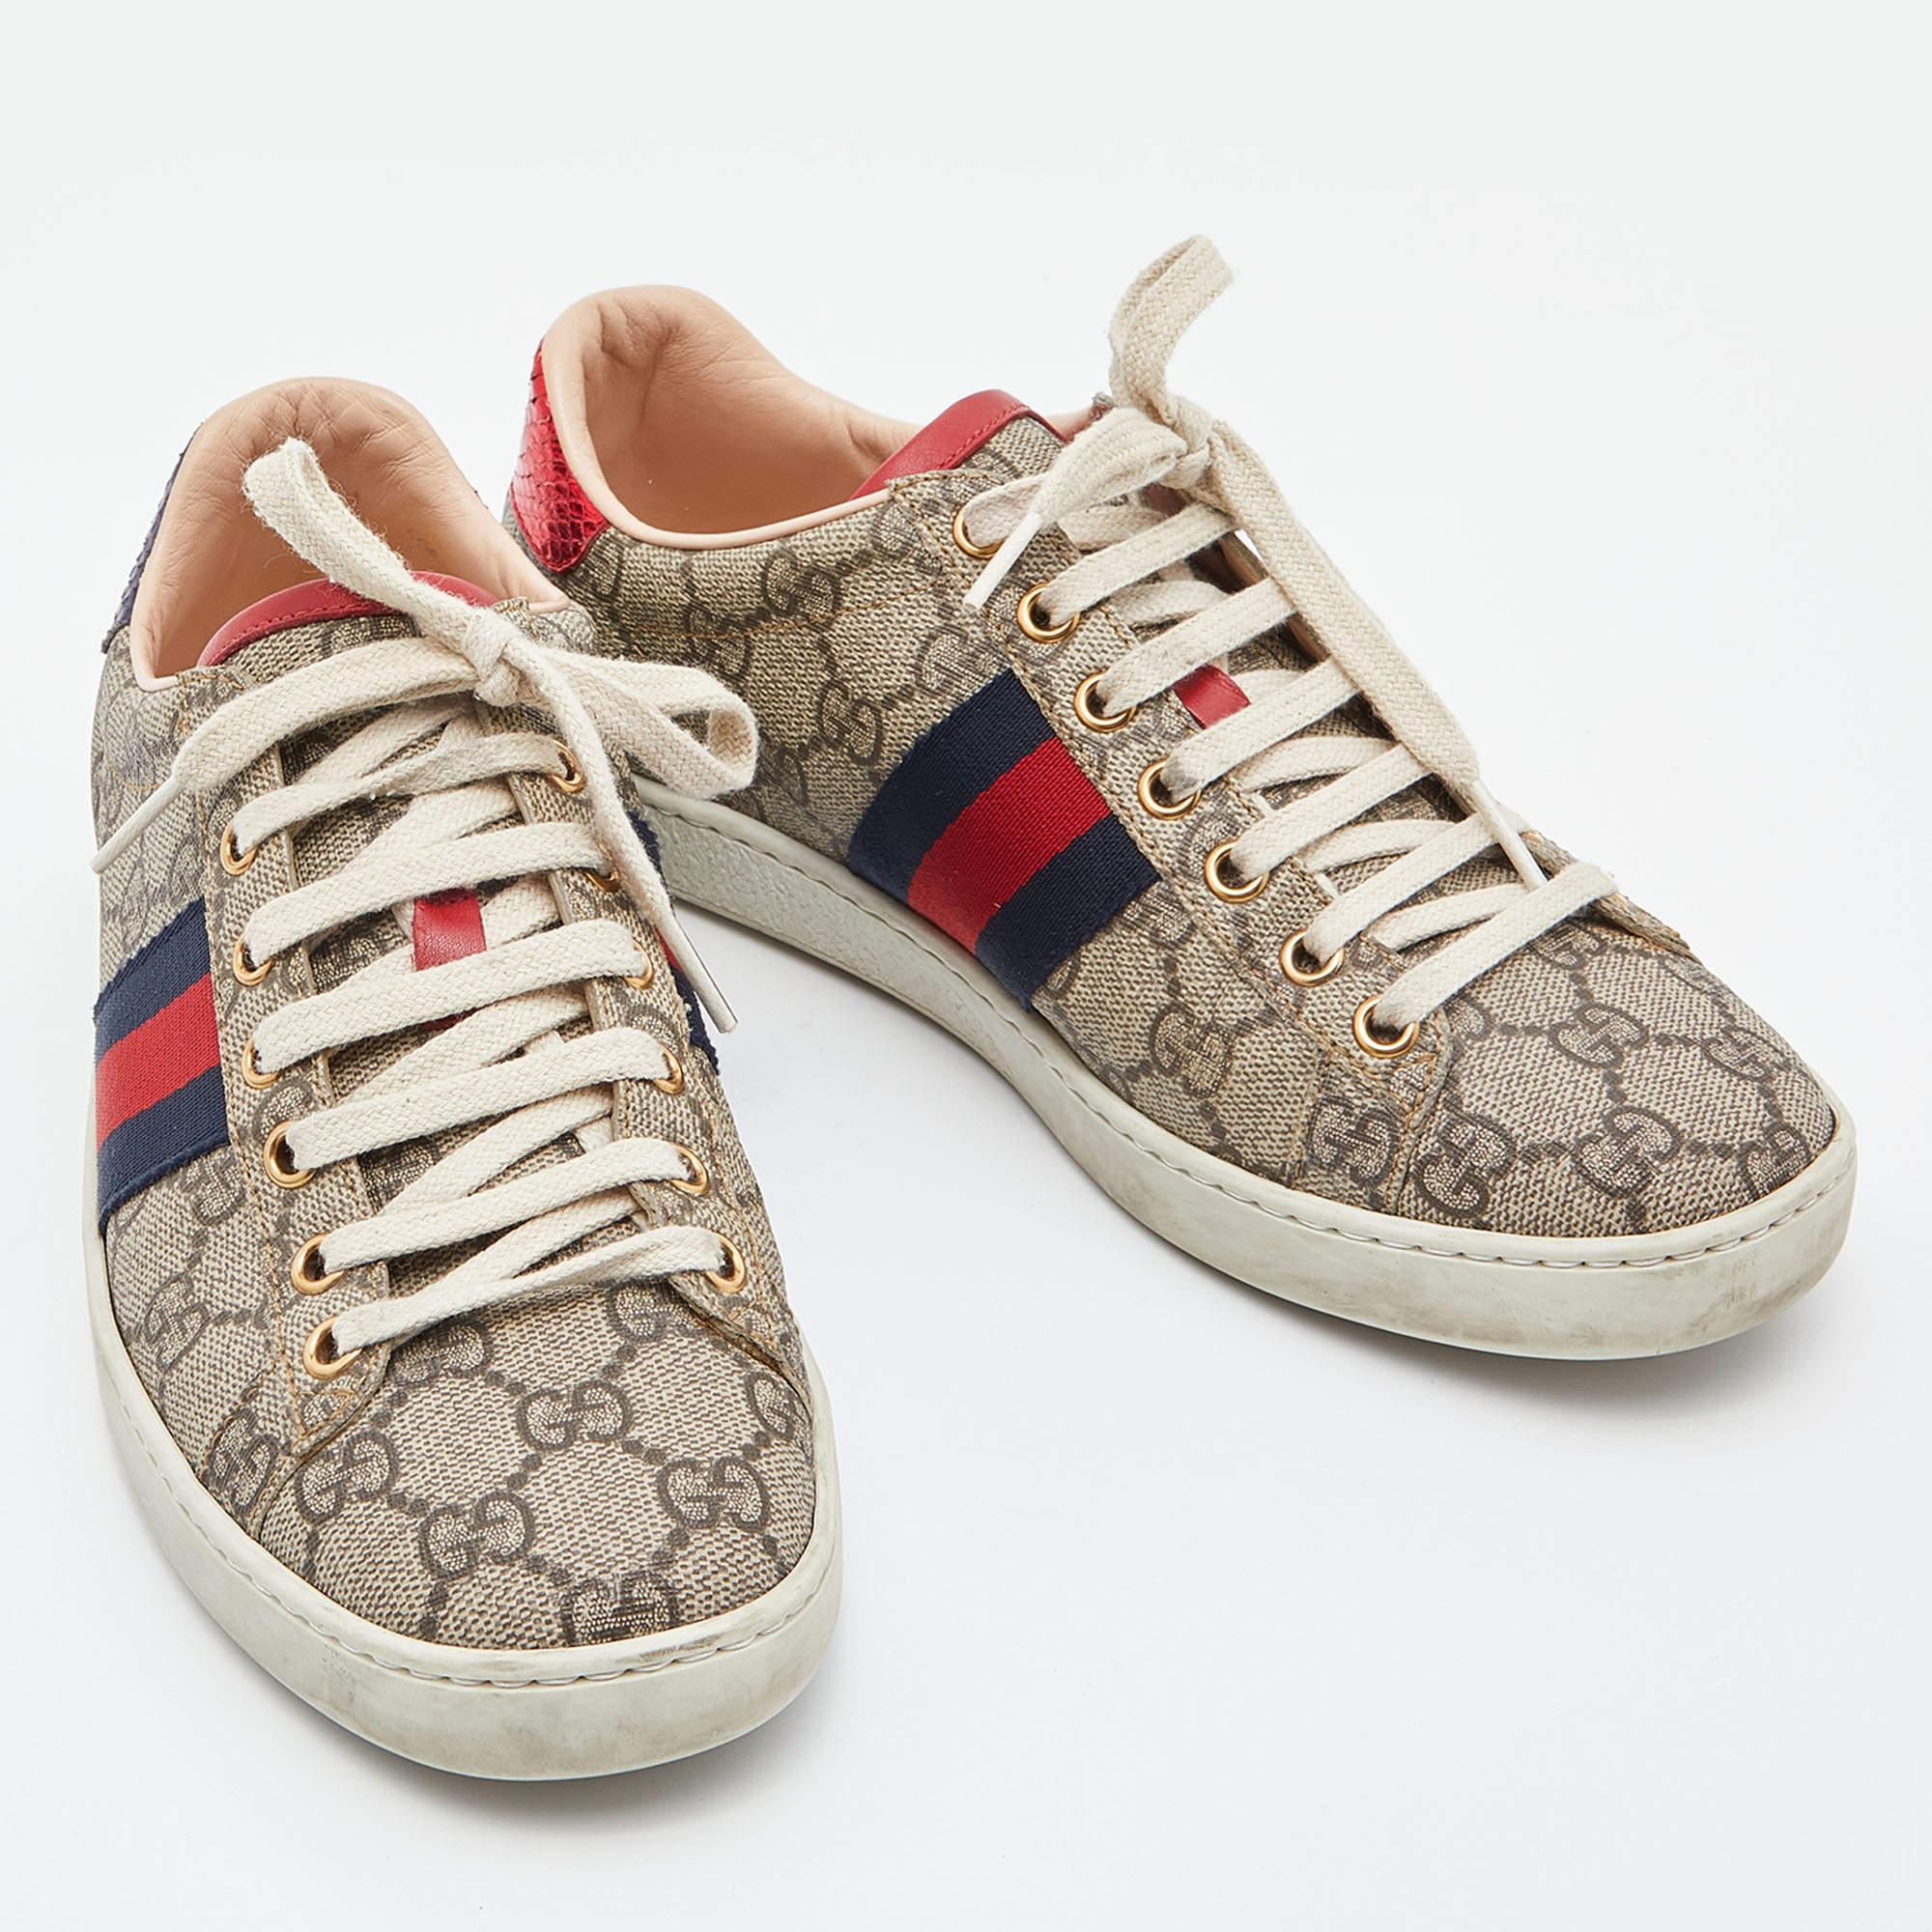 Gucci Beige/Brown GG Supreme Canvas Ace Sneakers Size 37 1